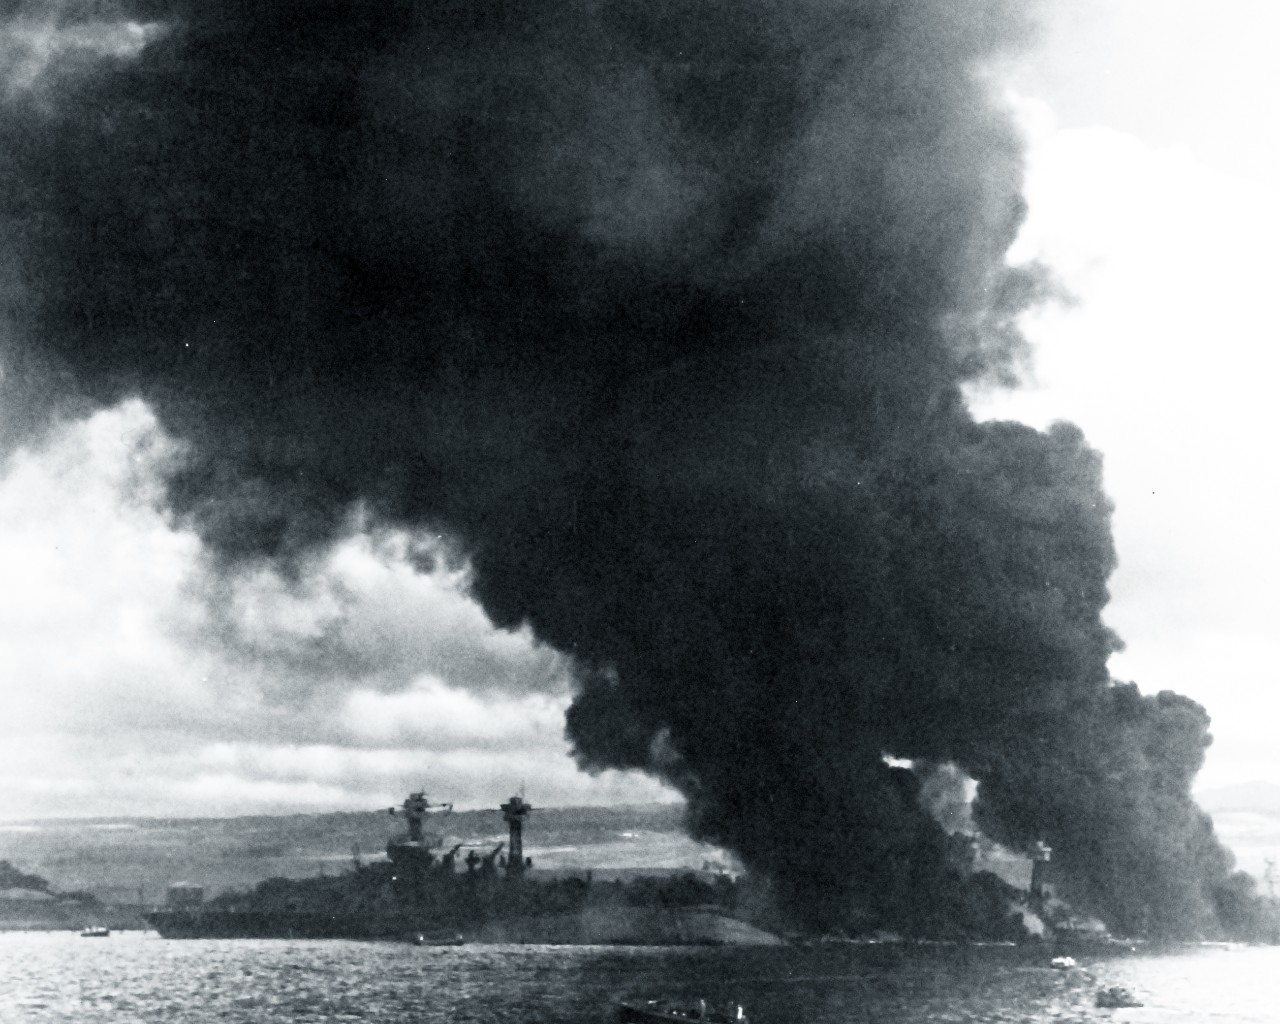 80-G-32921:   Japanese Attack on Pearl Harbor Attack, 7 December 1941.  USS Arizona (BB-39) is sunk and burning at right. USS West Virginia (BB-48) is in the right center, sunk alongside USS Tennessee (BB-43), with oil fires shrouding them both. Taken during or right after the Japanese Attack. U.S. Navy photograph, now in the collections of the National Archives.  (8/27/2013).